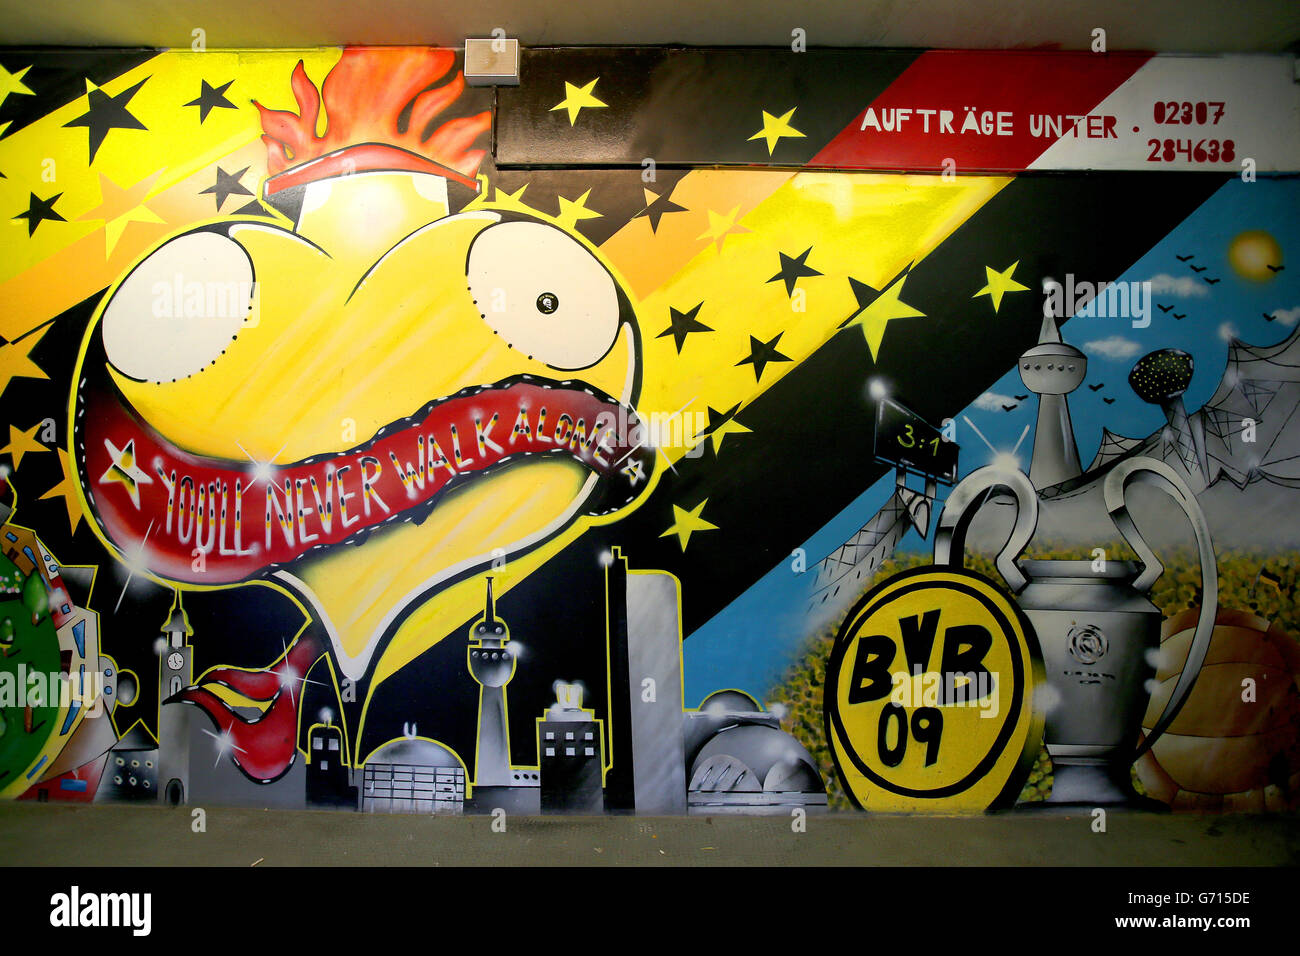 General view of a mural at the Signal Iduna Park, home to Borussia Dortmund Stock Photo